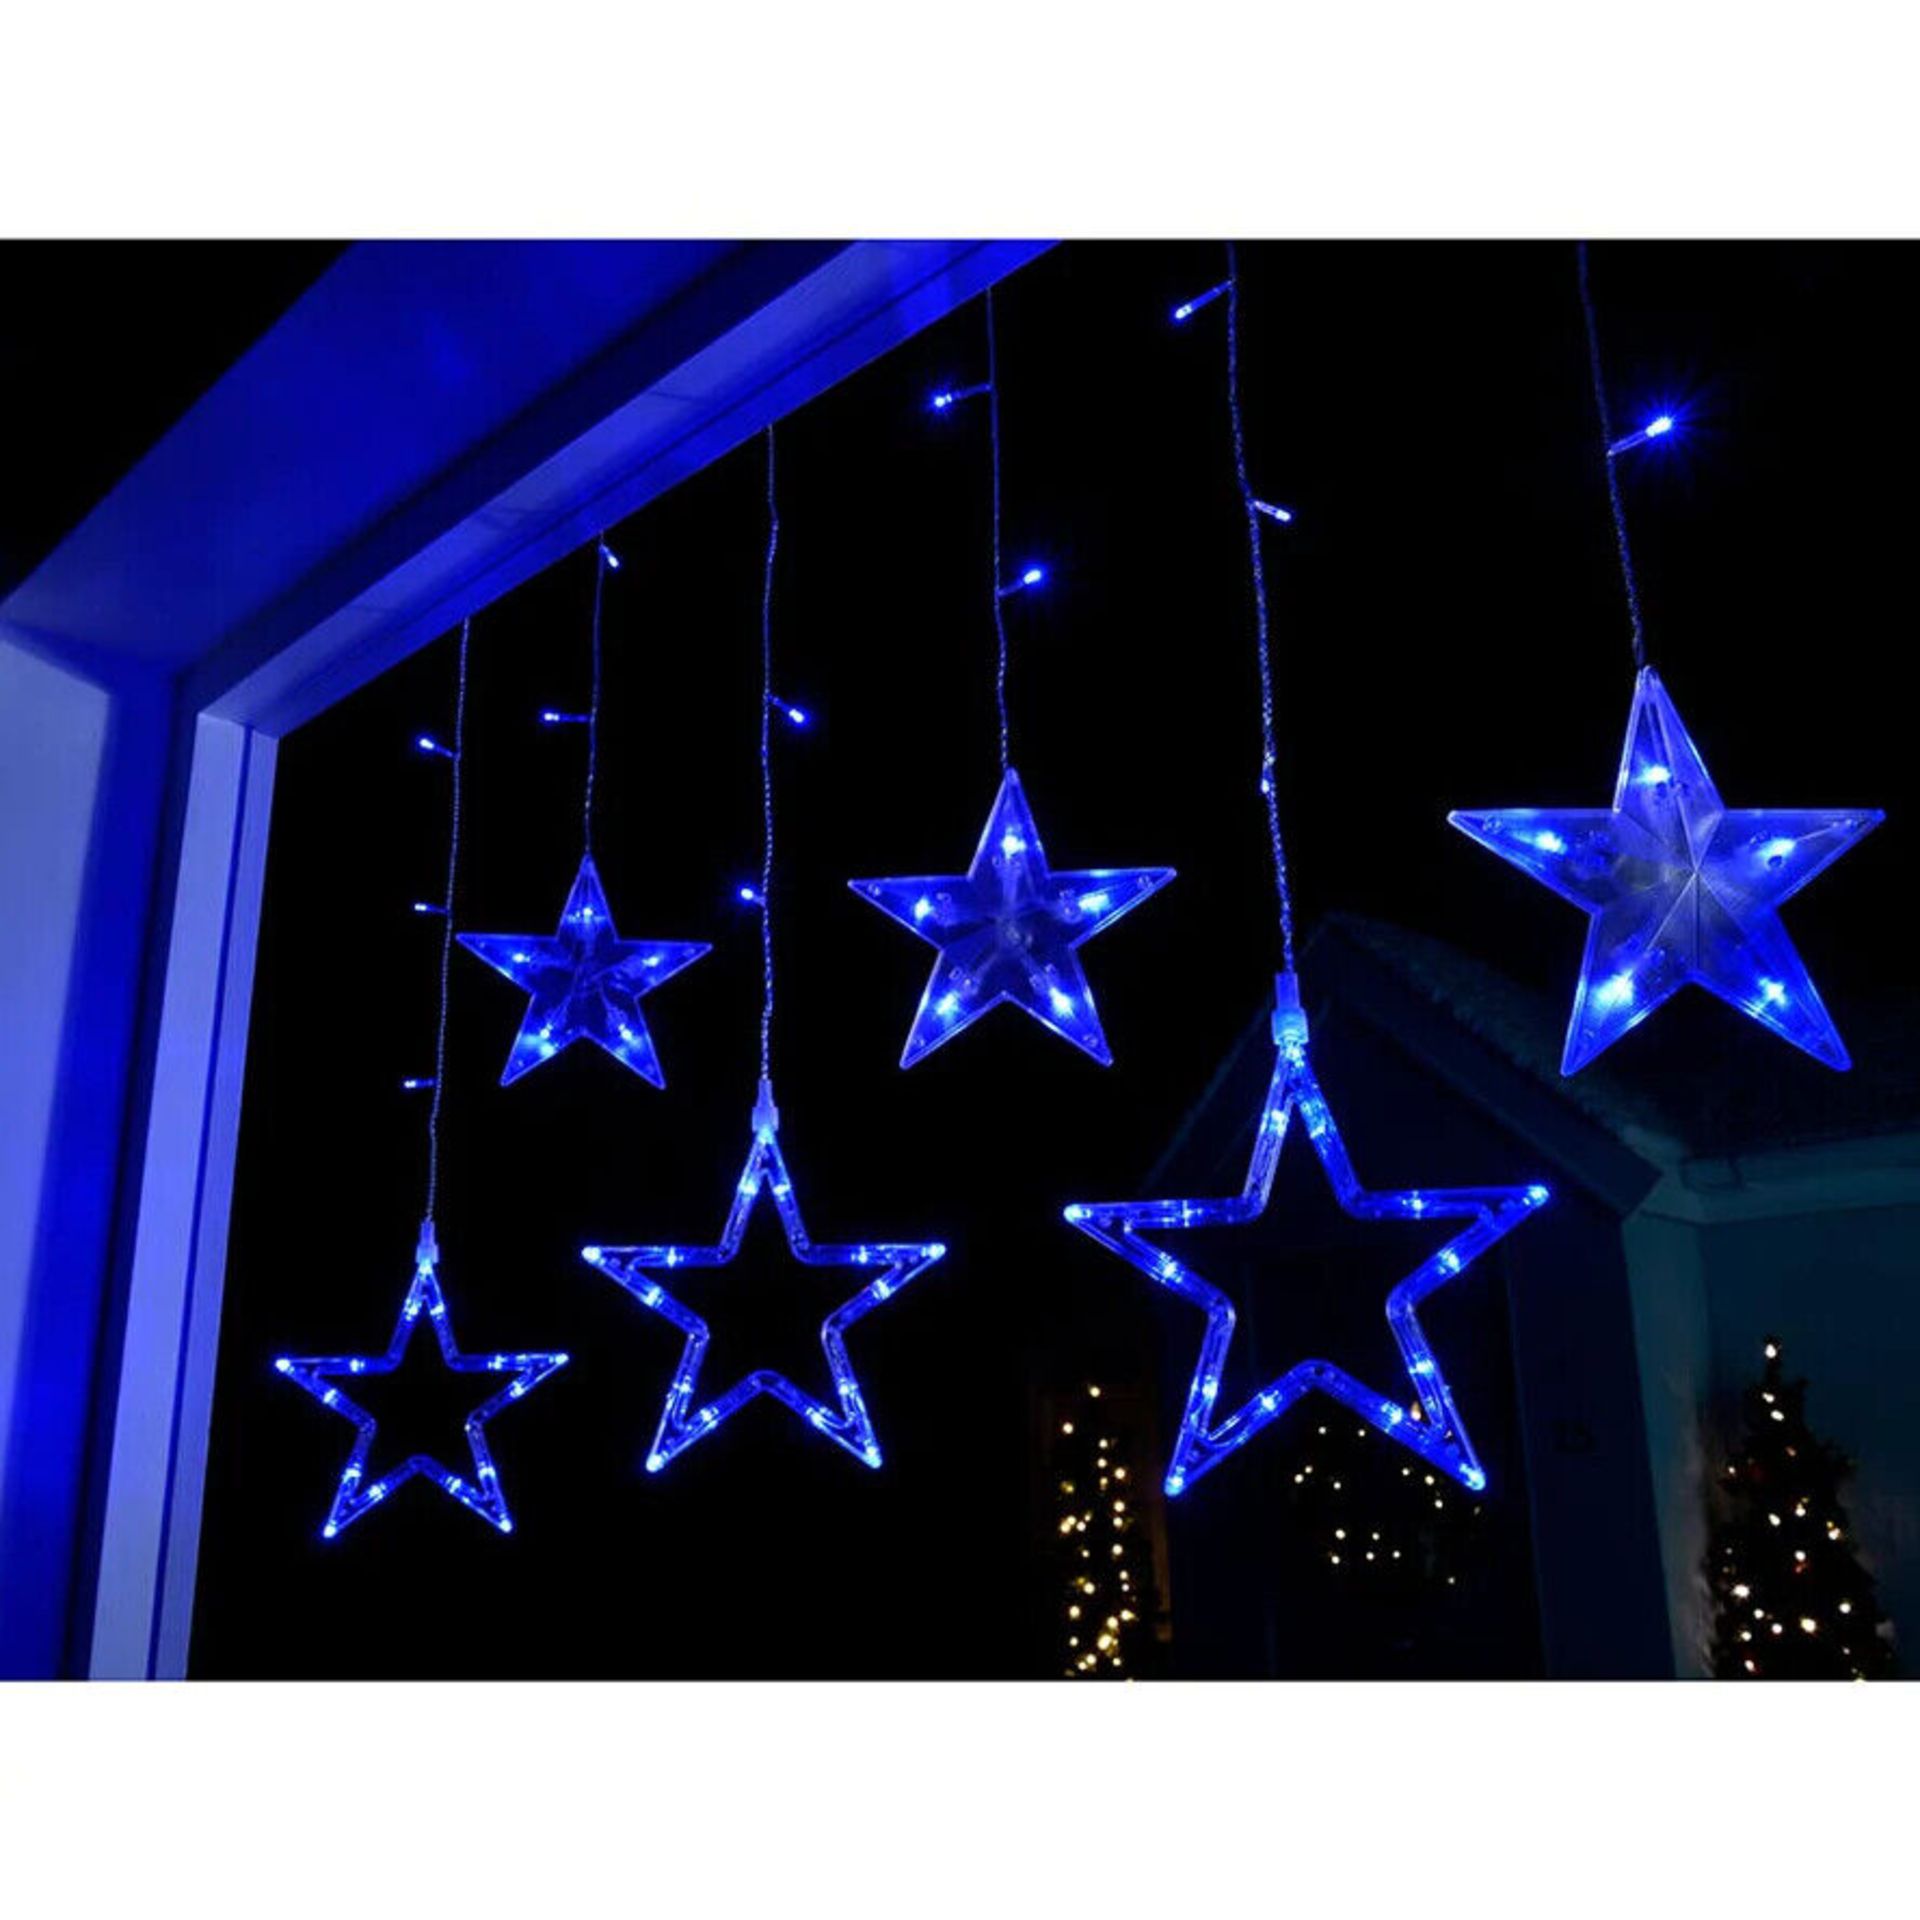 Star Blue Curtain Lights. Brand New. RRP £28.99 - Image 2 of 2